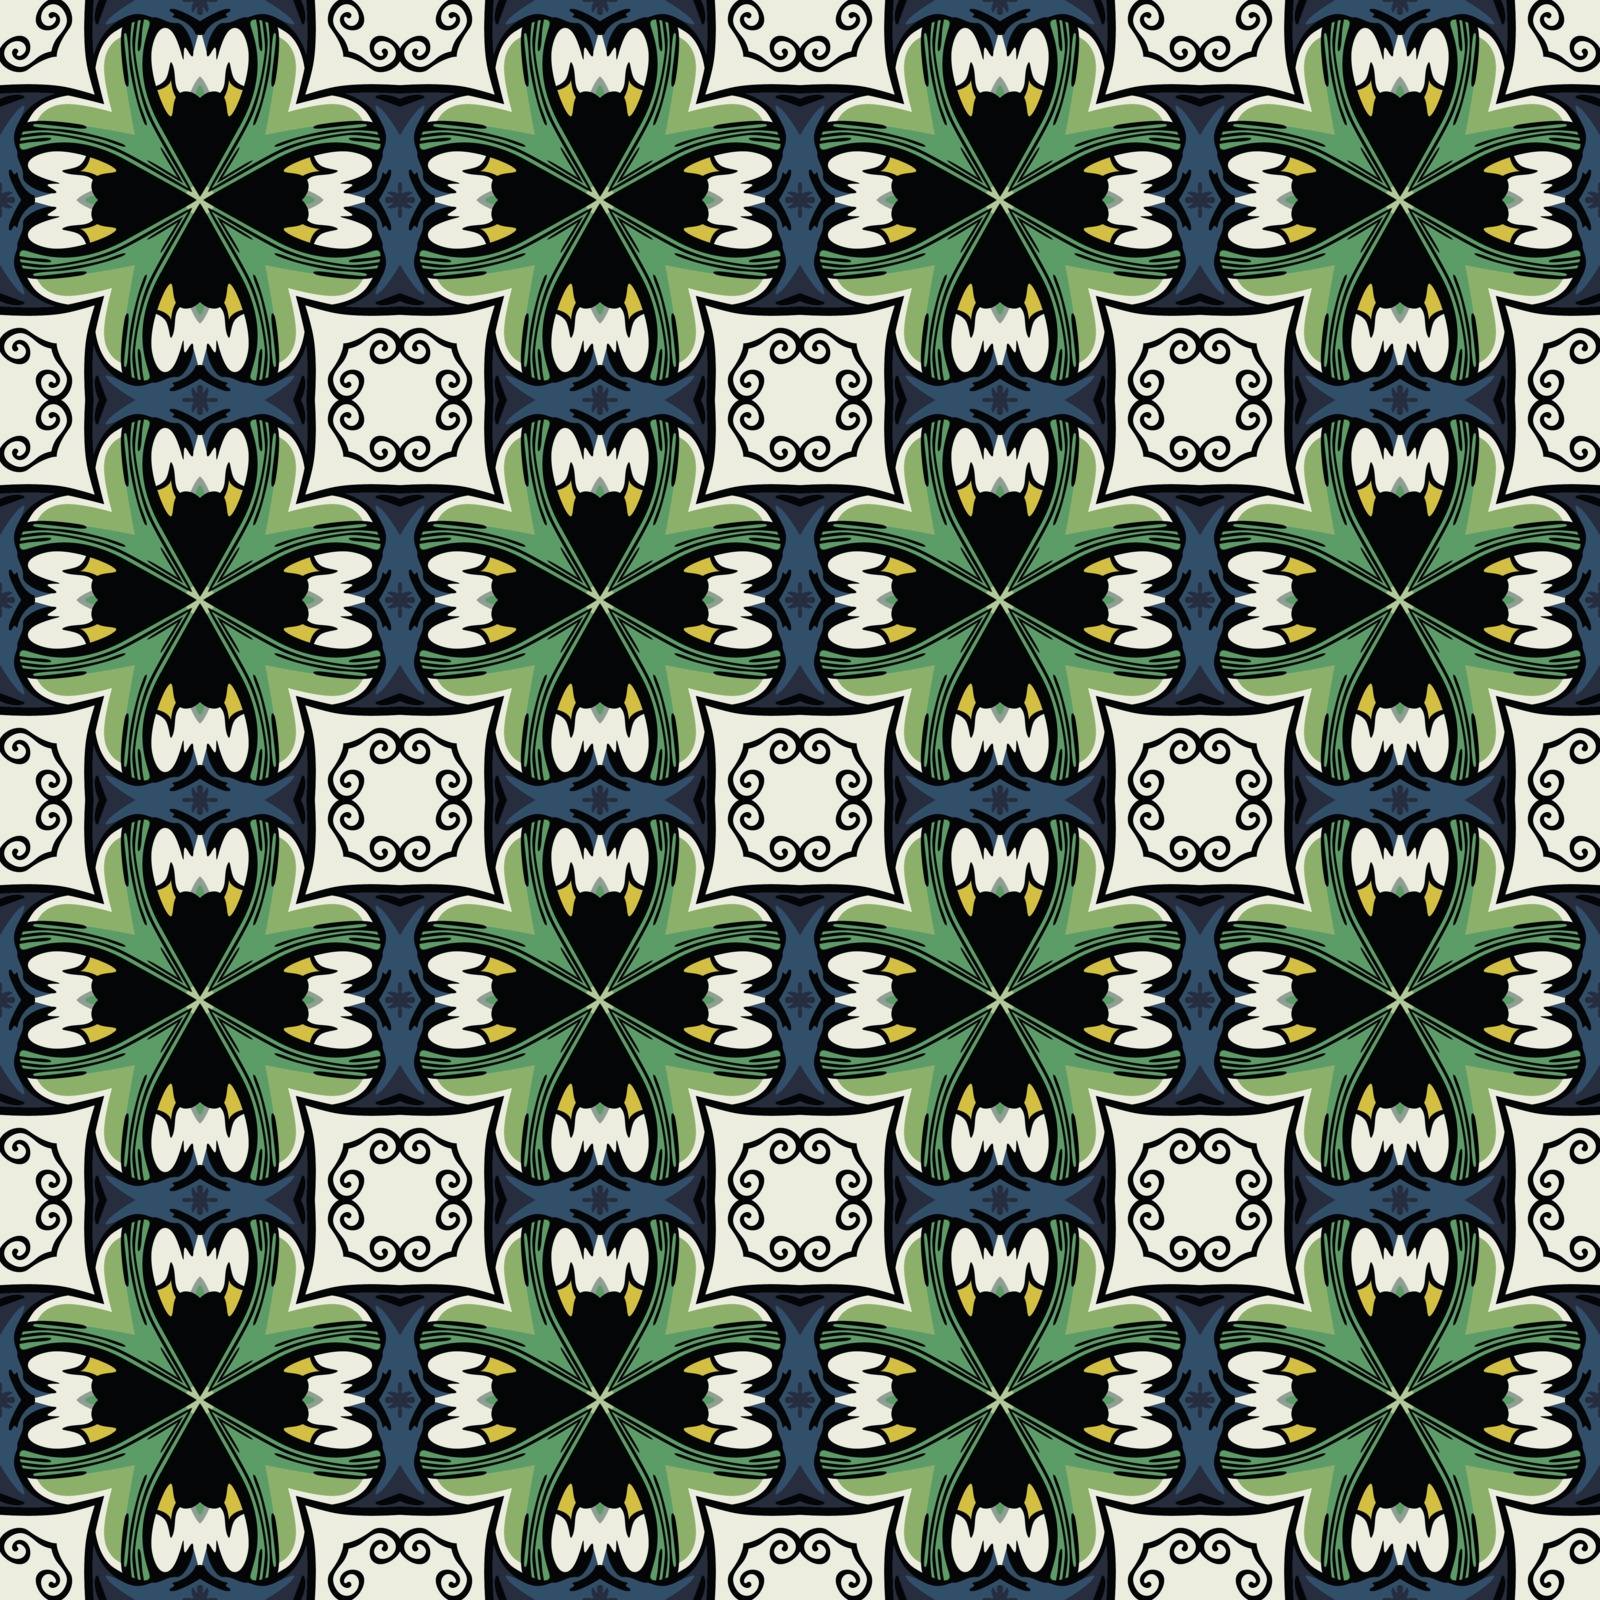 Seamless illustrated pattern made of abstract elements in white, blue, green, yellow and black